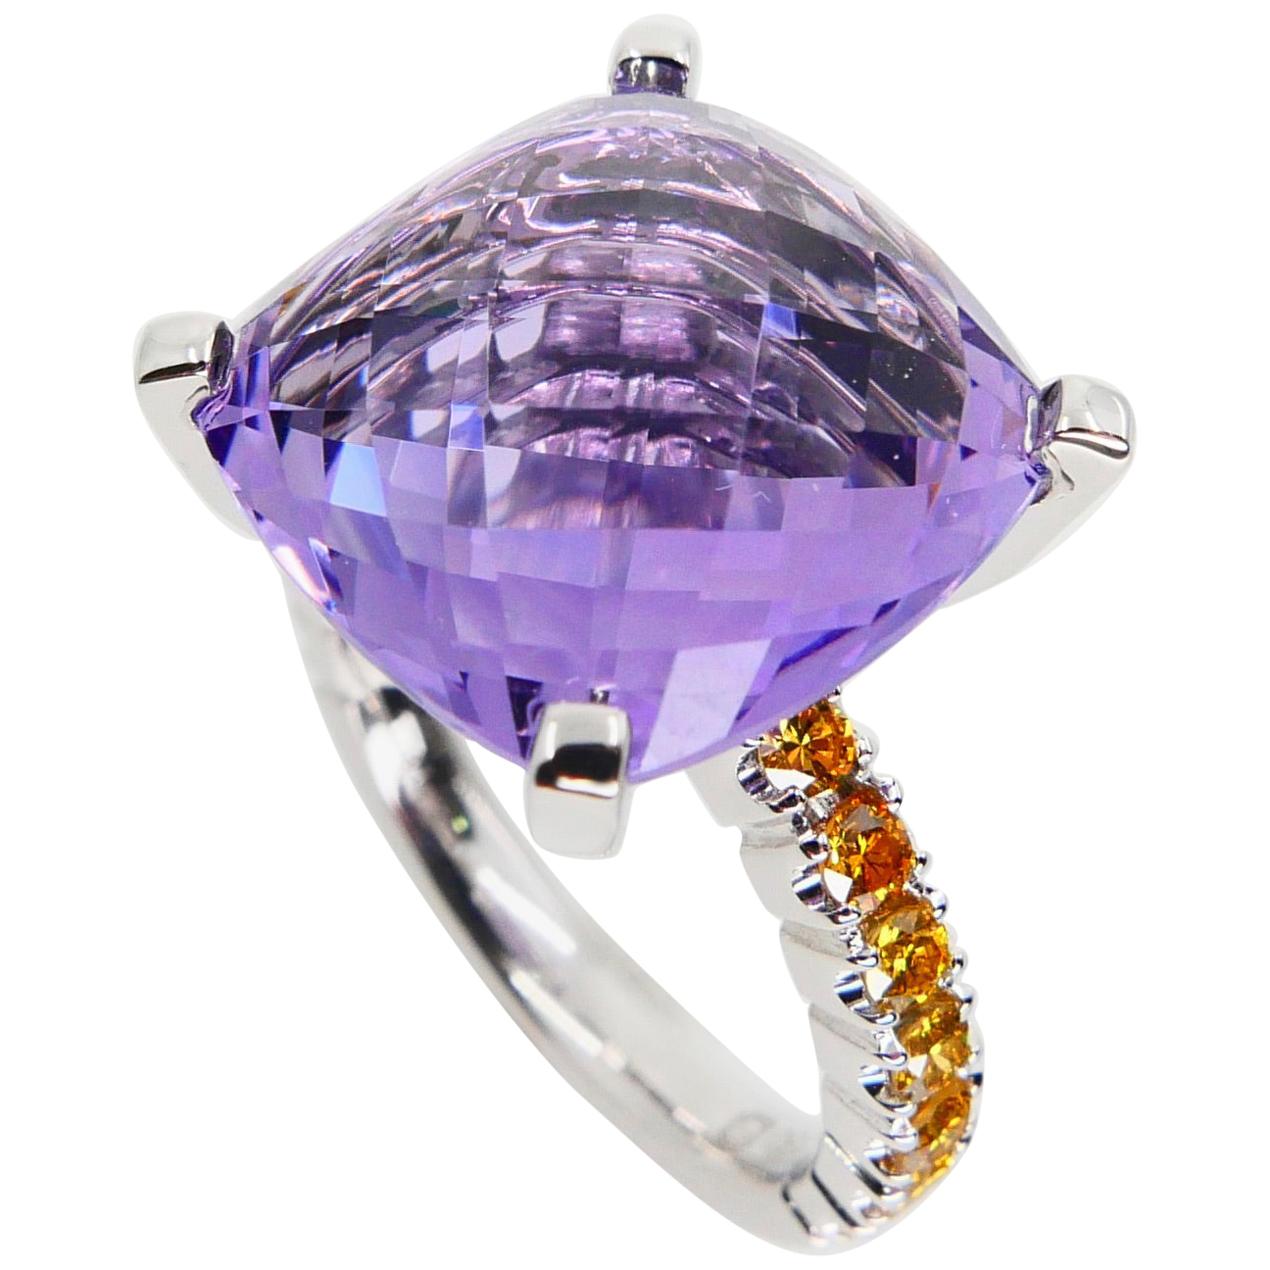 8.70 Carat Amethyst Cocktail Ring with Fancy Vivid Yellow Diamonds, Statement